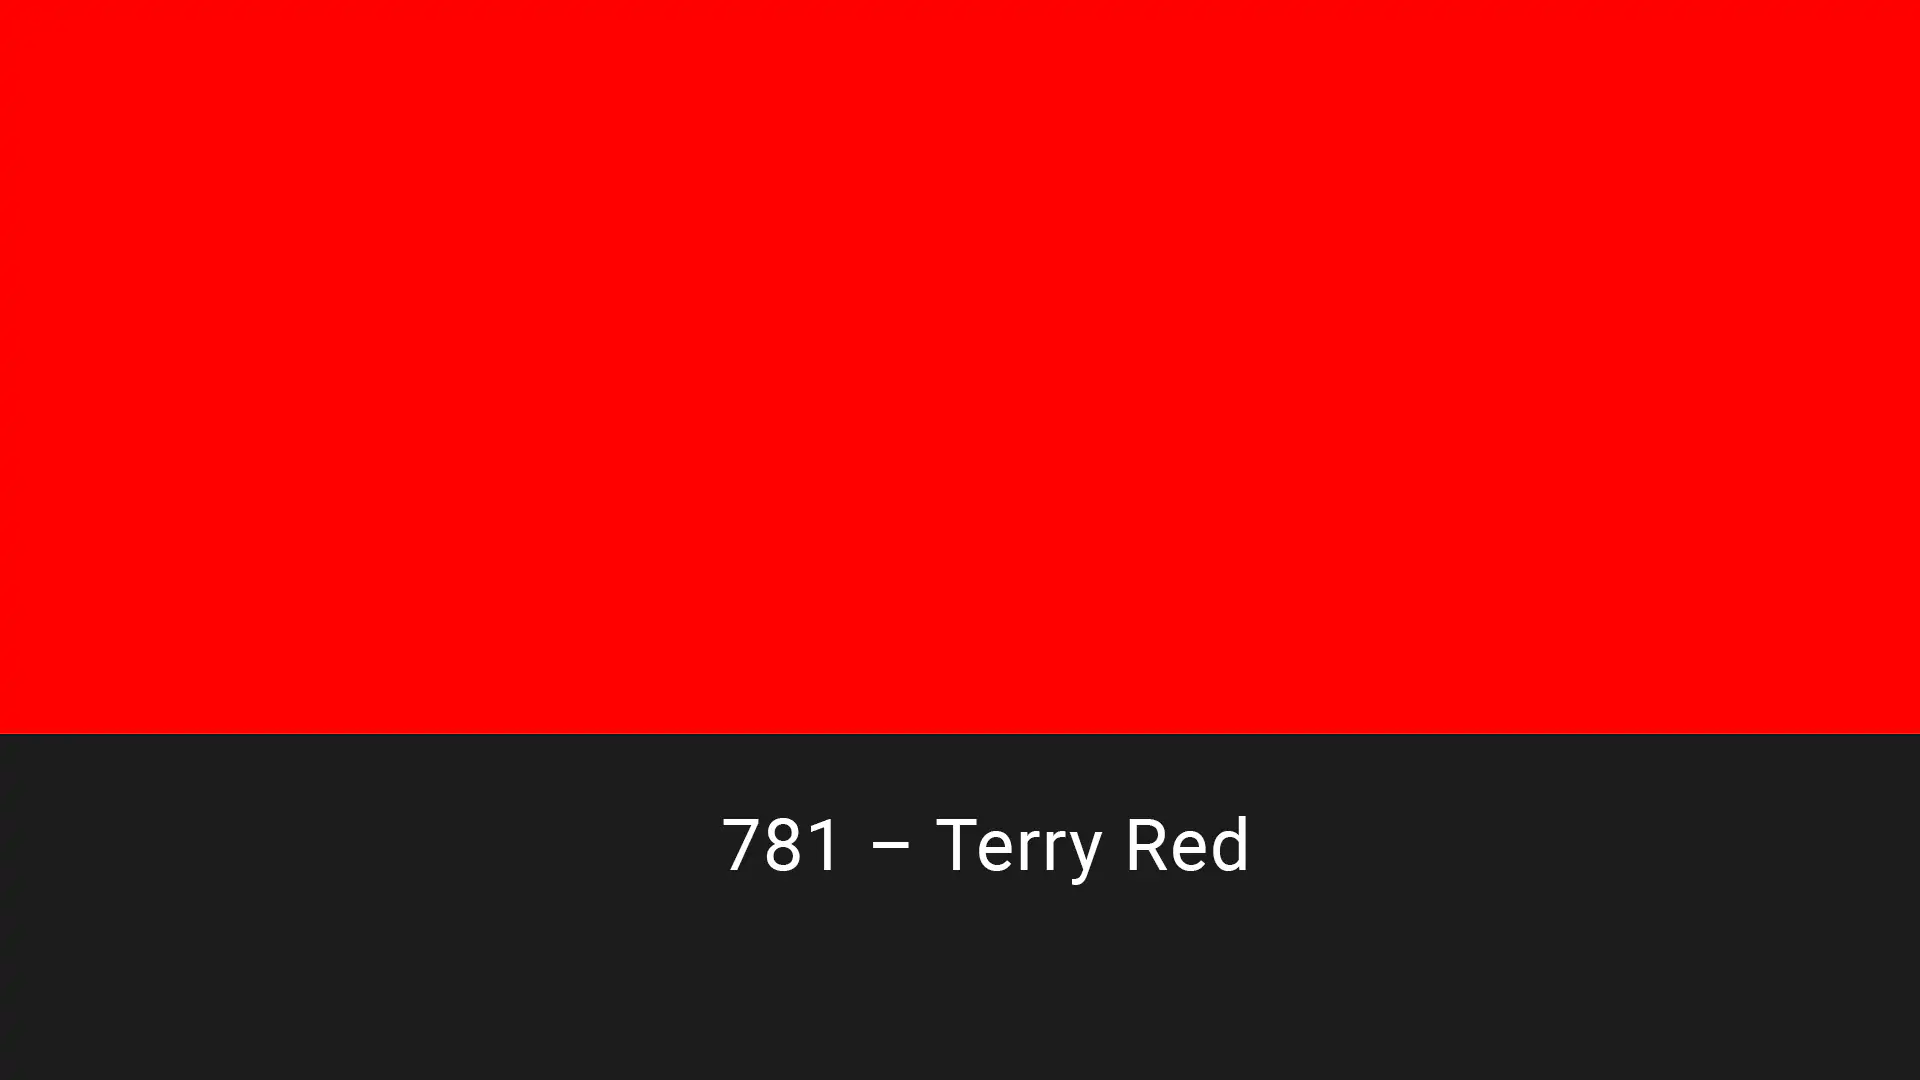 Cotech filters 781 Terry Red